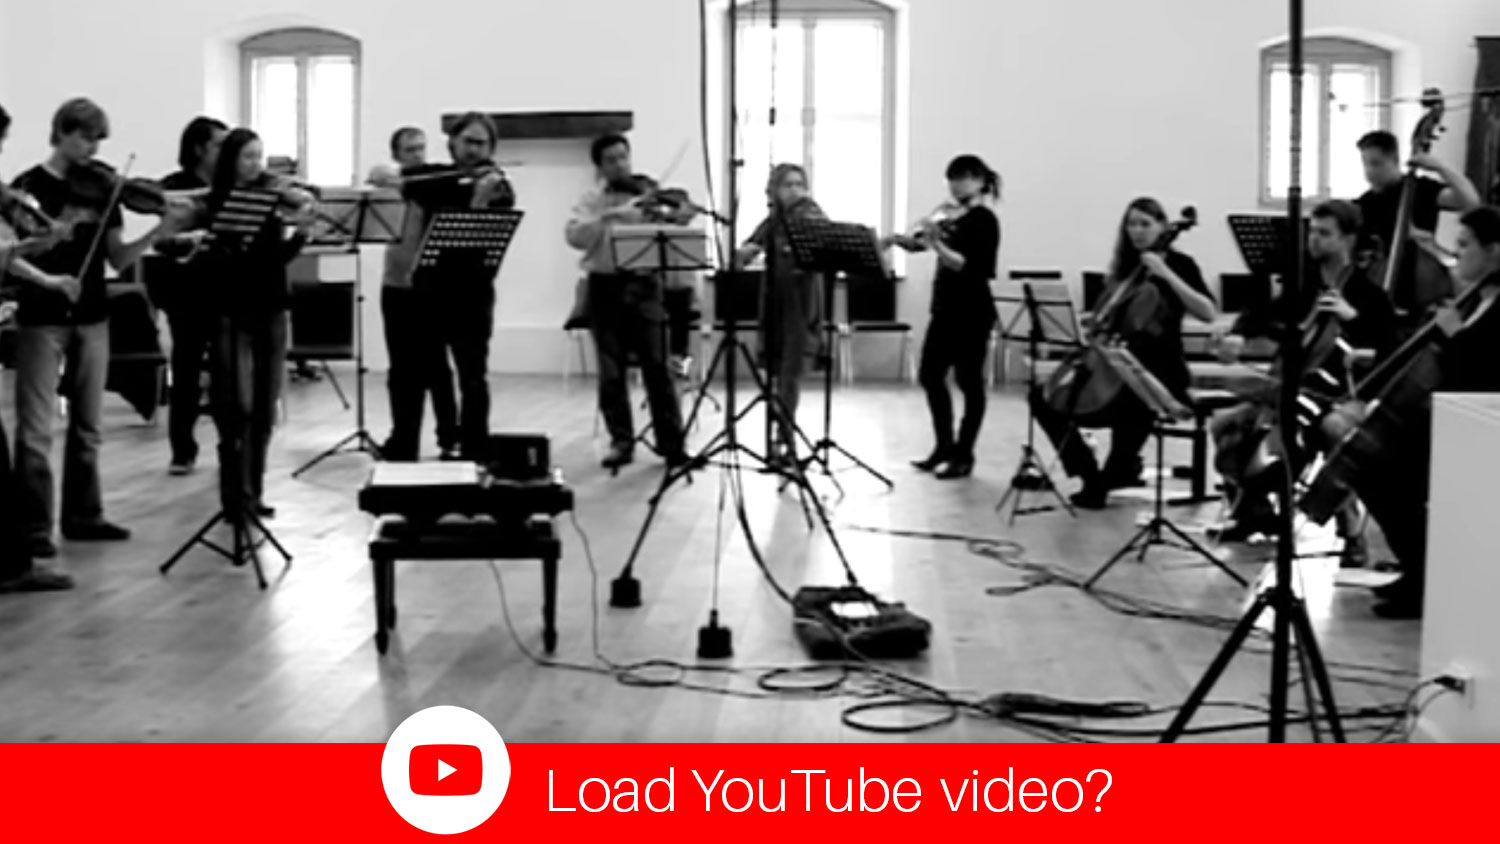 YouTube video dogma chamber orchestra